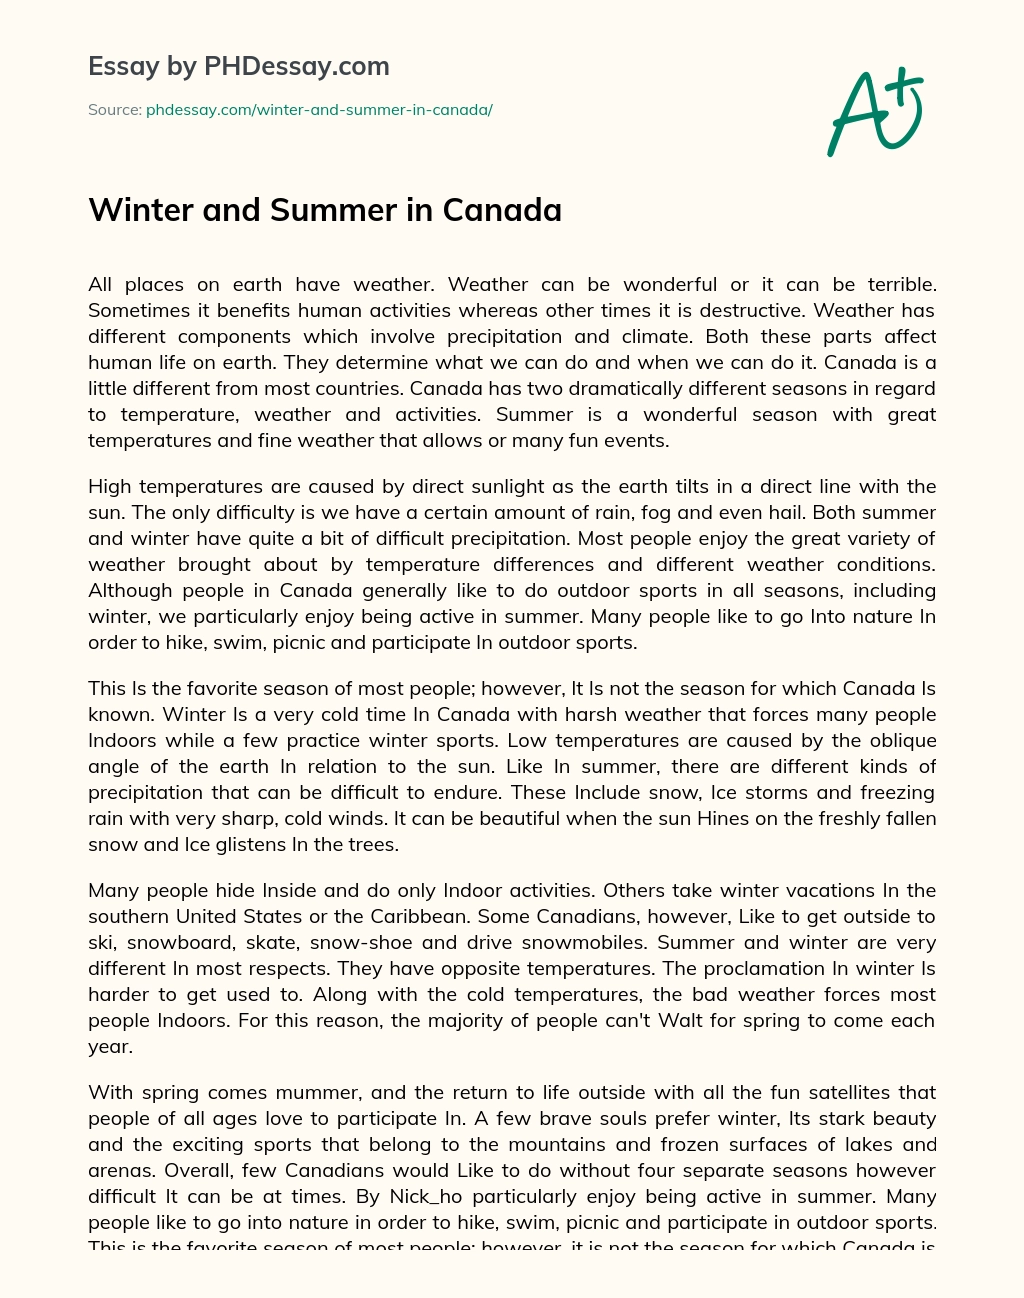 Winter and Summer in Canada essay